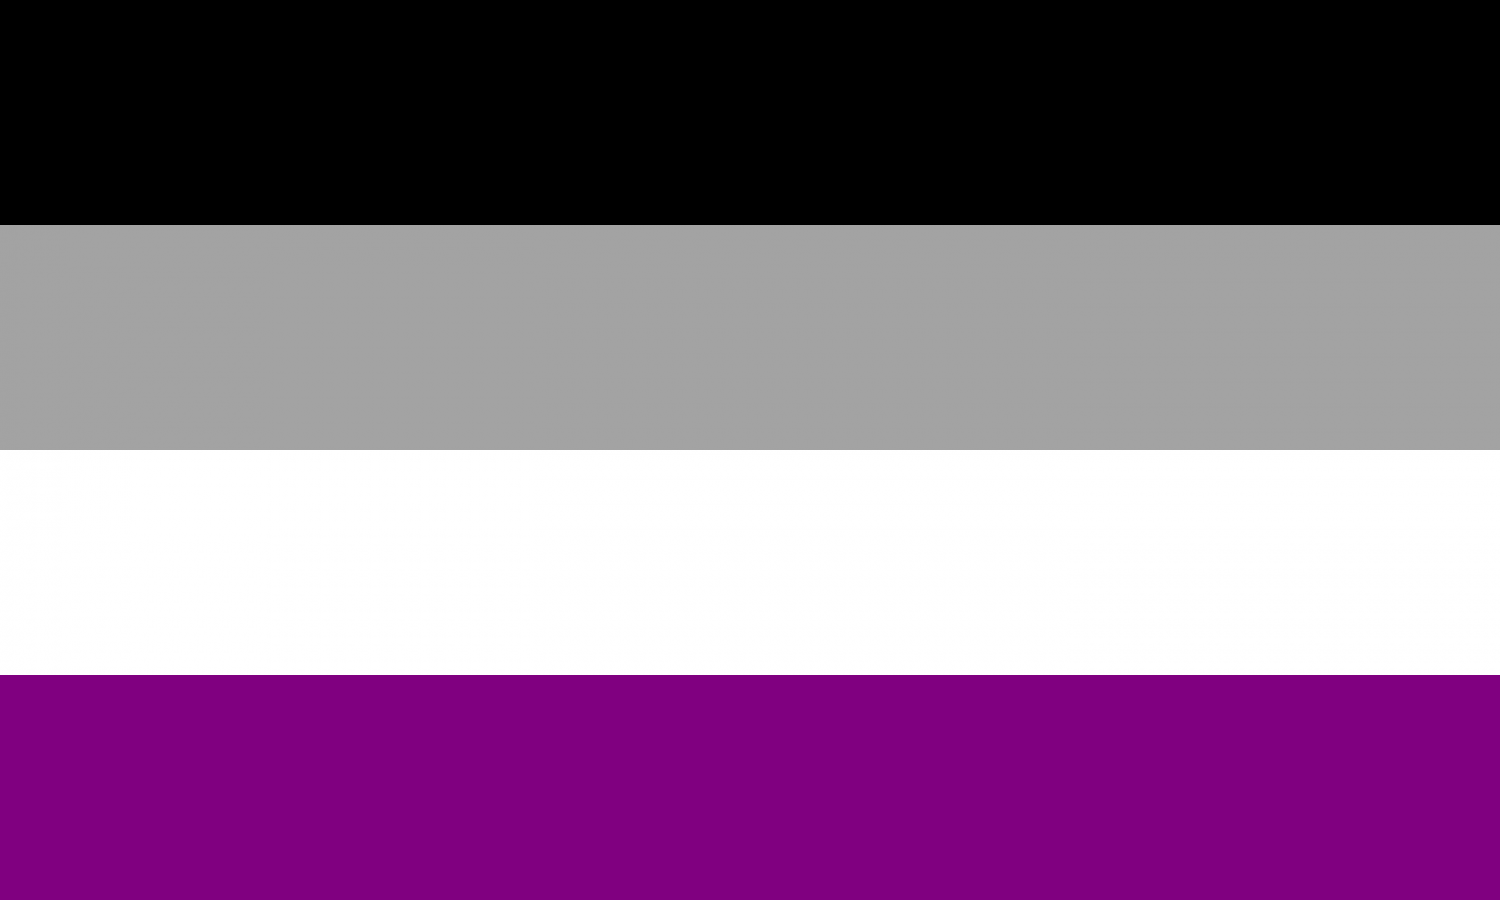 The Asexual flag